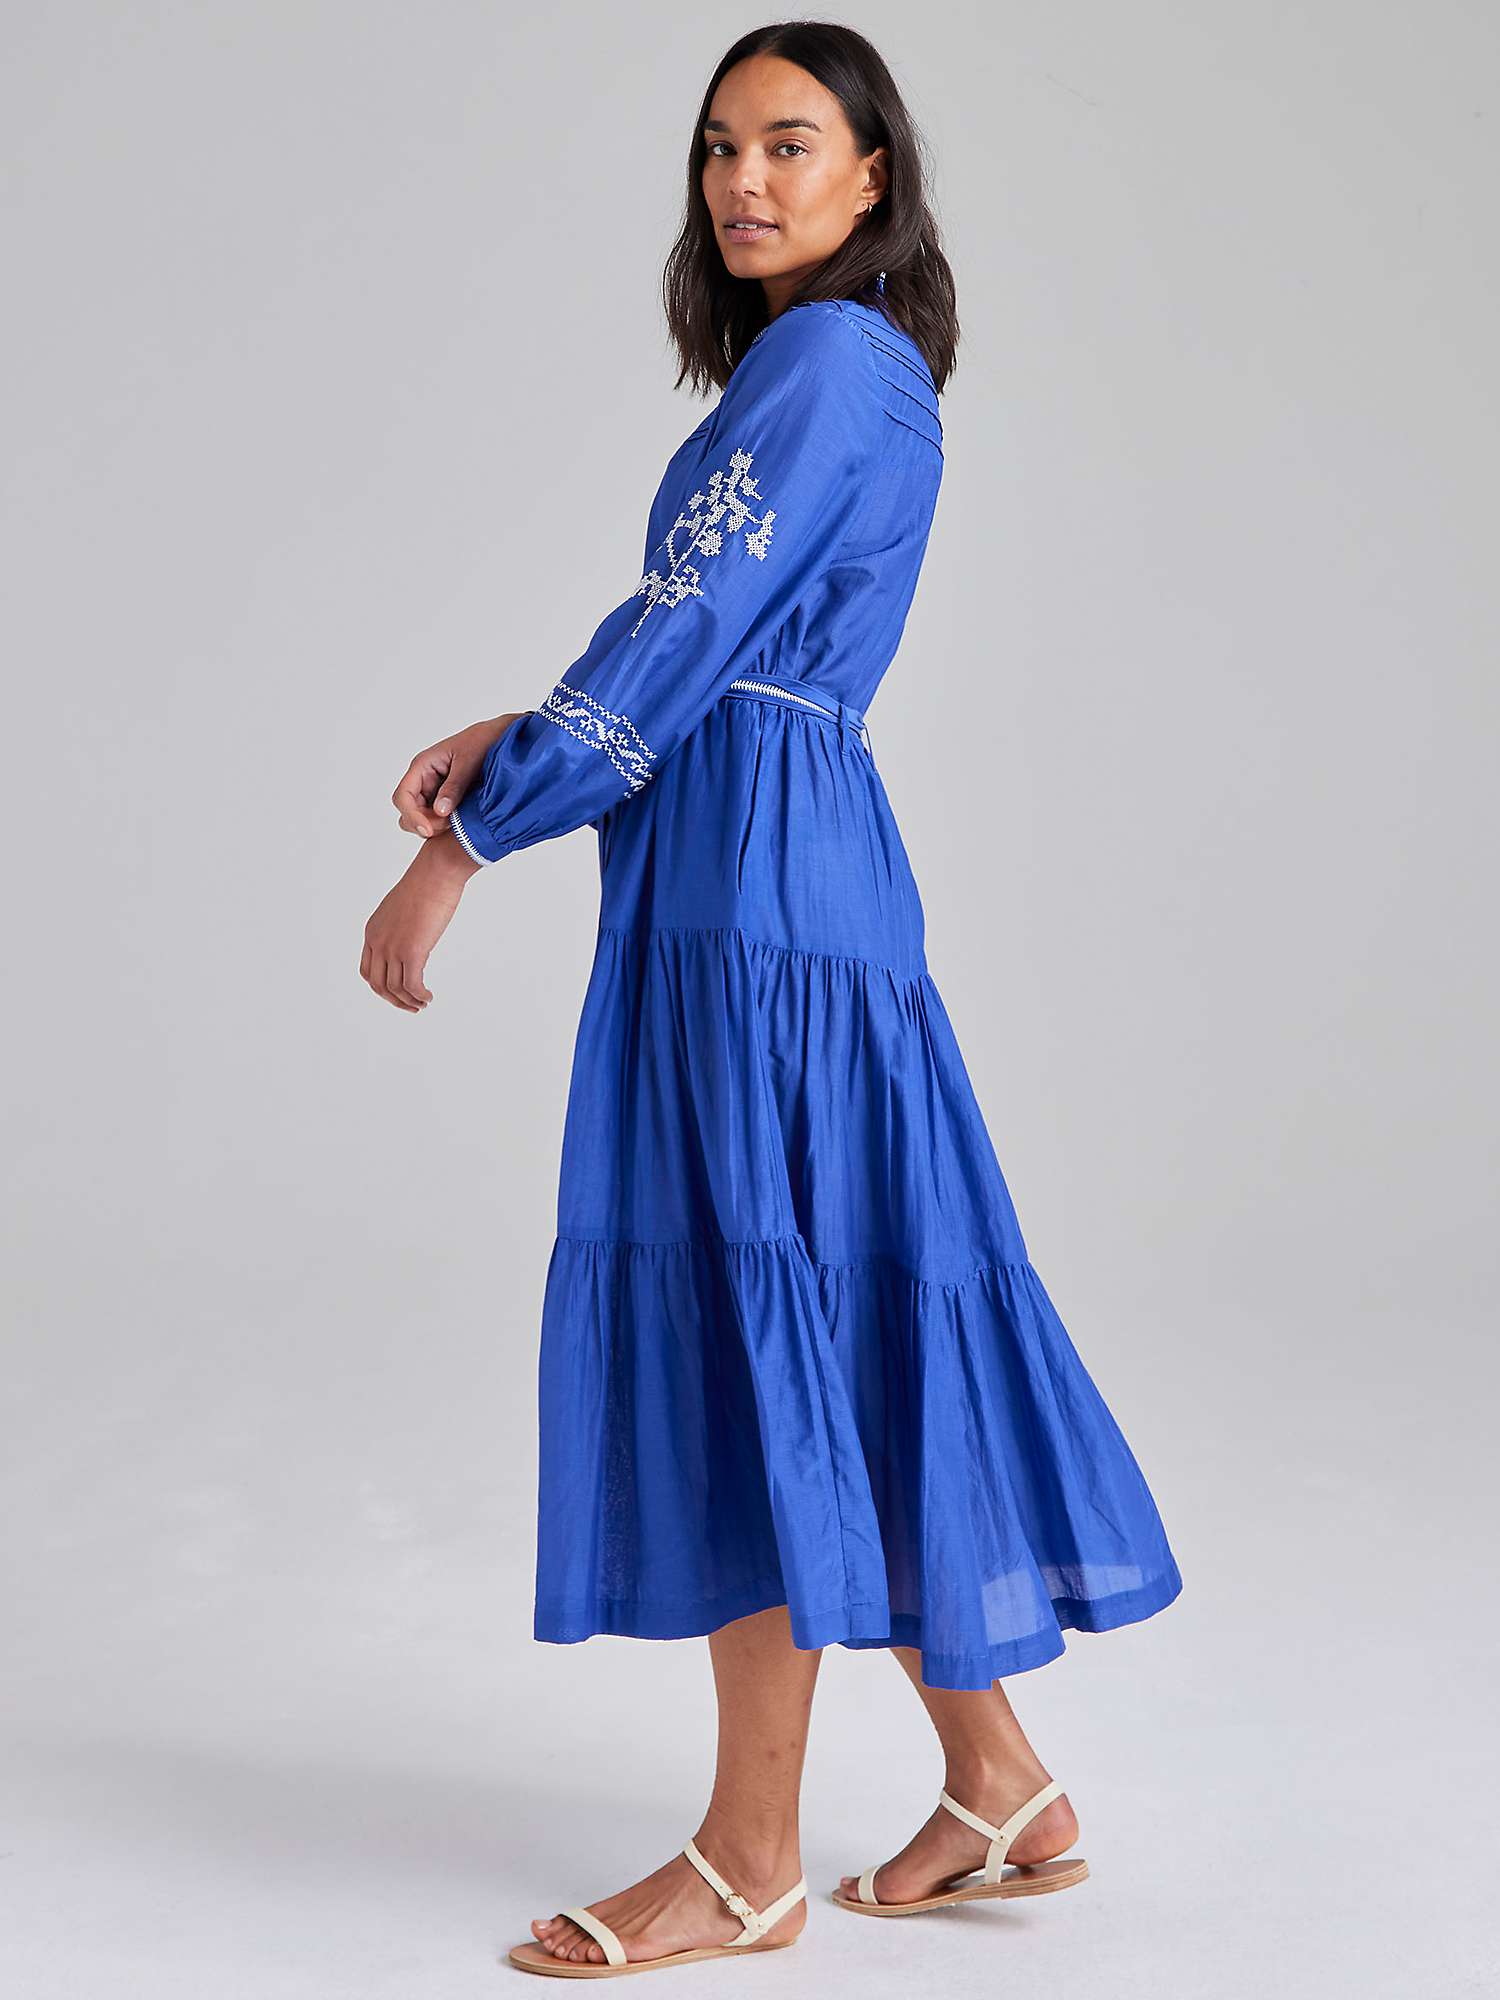 Buy Cape Cove Cow Parsley Embroidered Cotton Silk Blend Midi Dress, Dazzling Blue Online at johnlewis.com